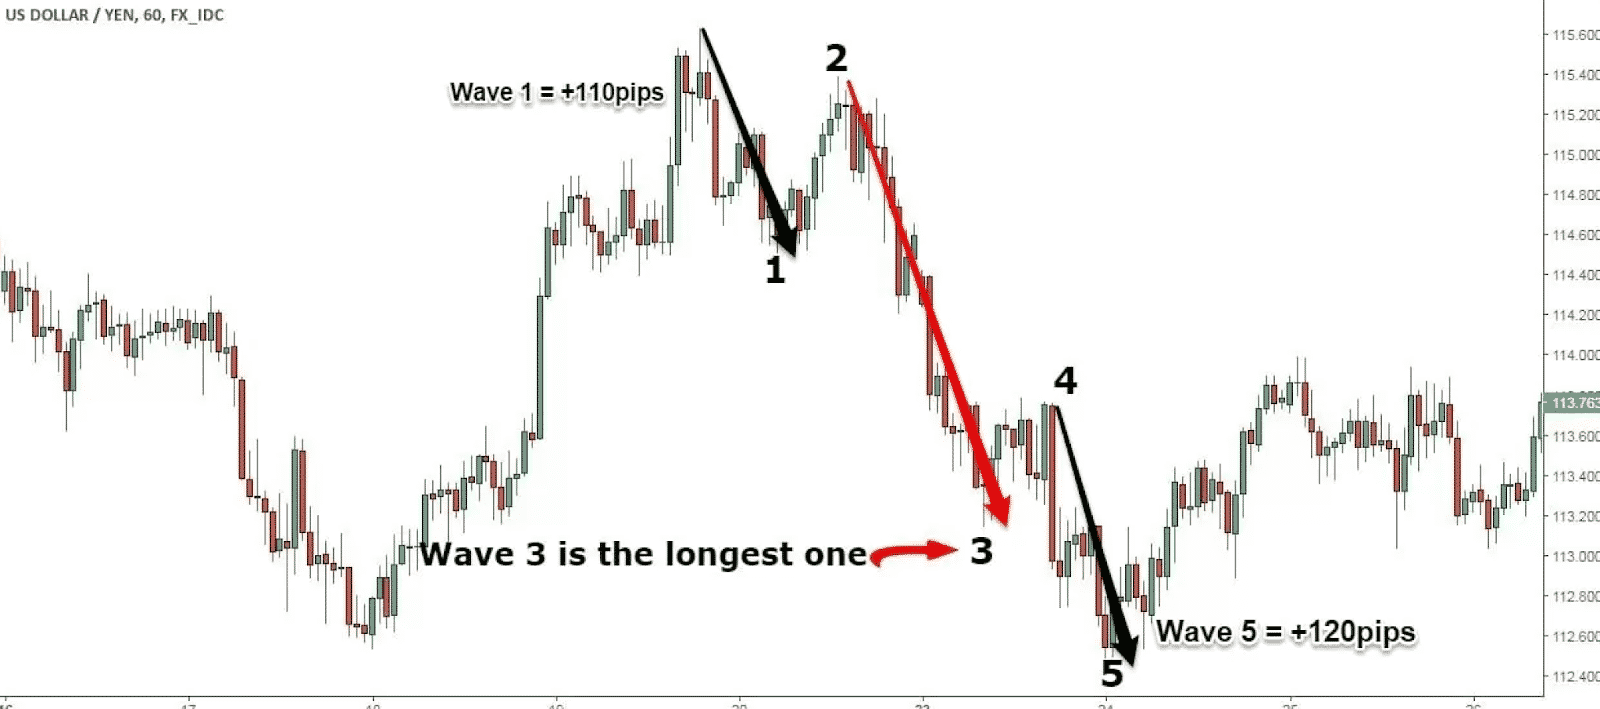 Waves on the chart